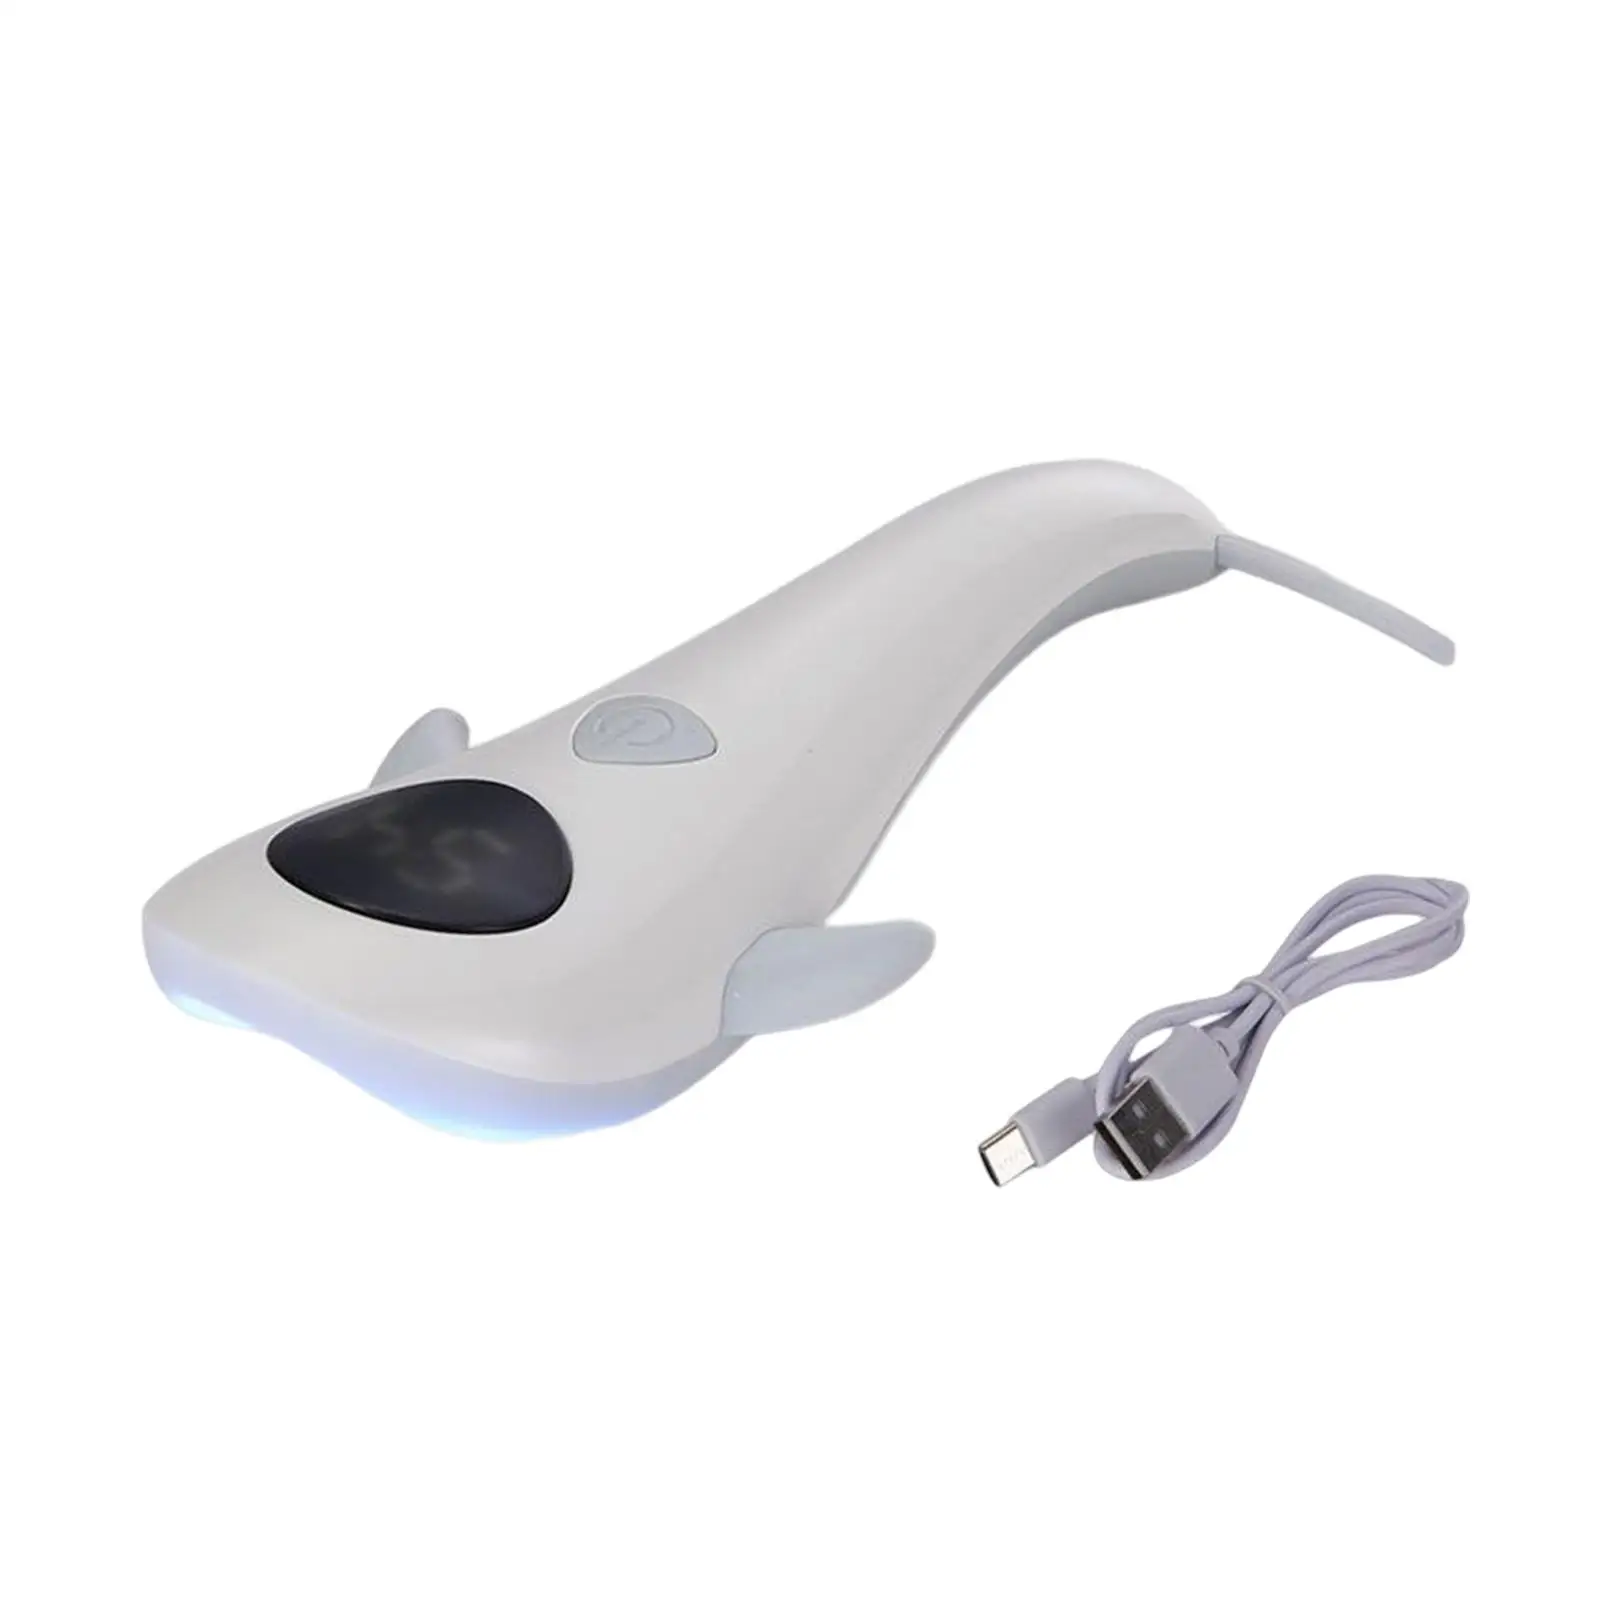 Professional Nail Lamp Salon and Home Use Nail Art Tools with 60S 90S 2 timers Use C Manicure 5W Handheld Gel Nail Light